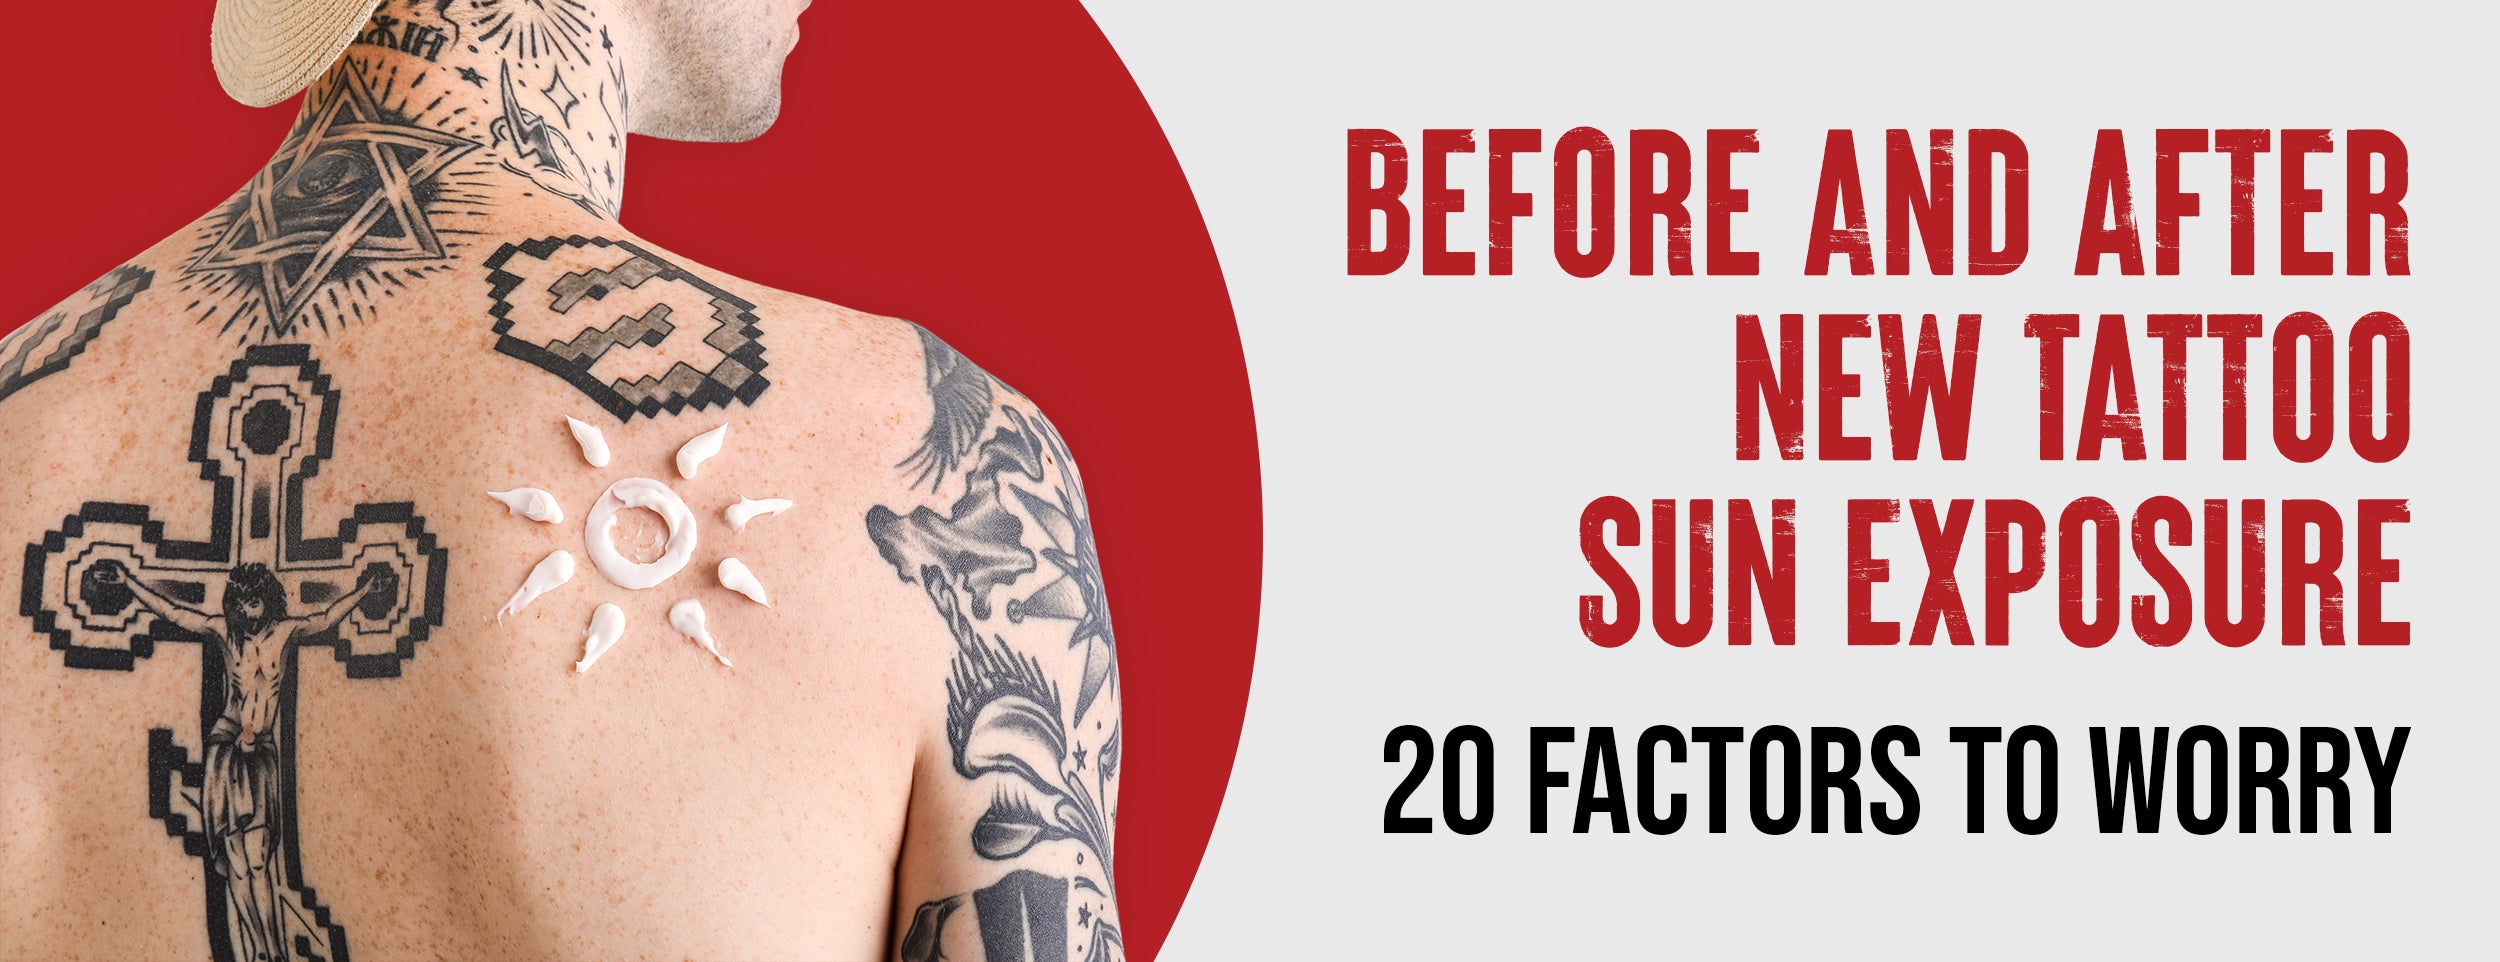 7 Things To Keep In Mind When Exposed To The Sun After New Tattoos